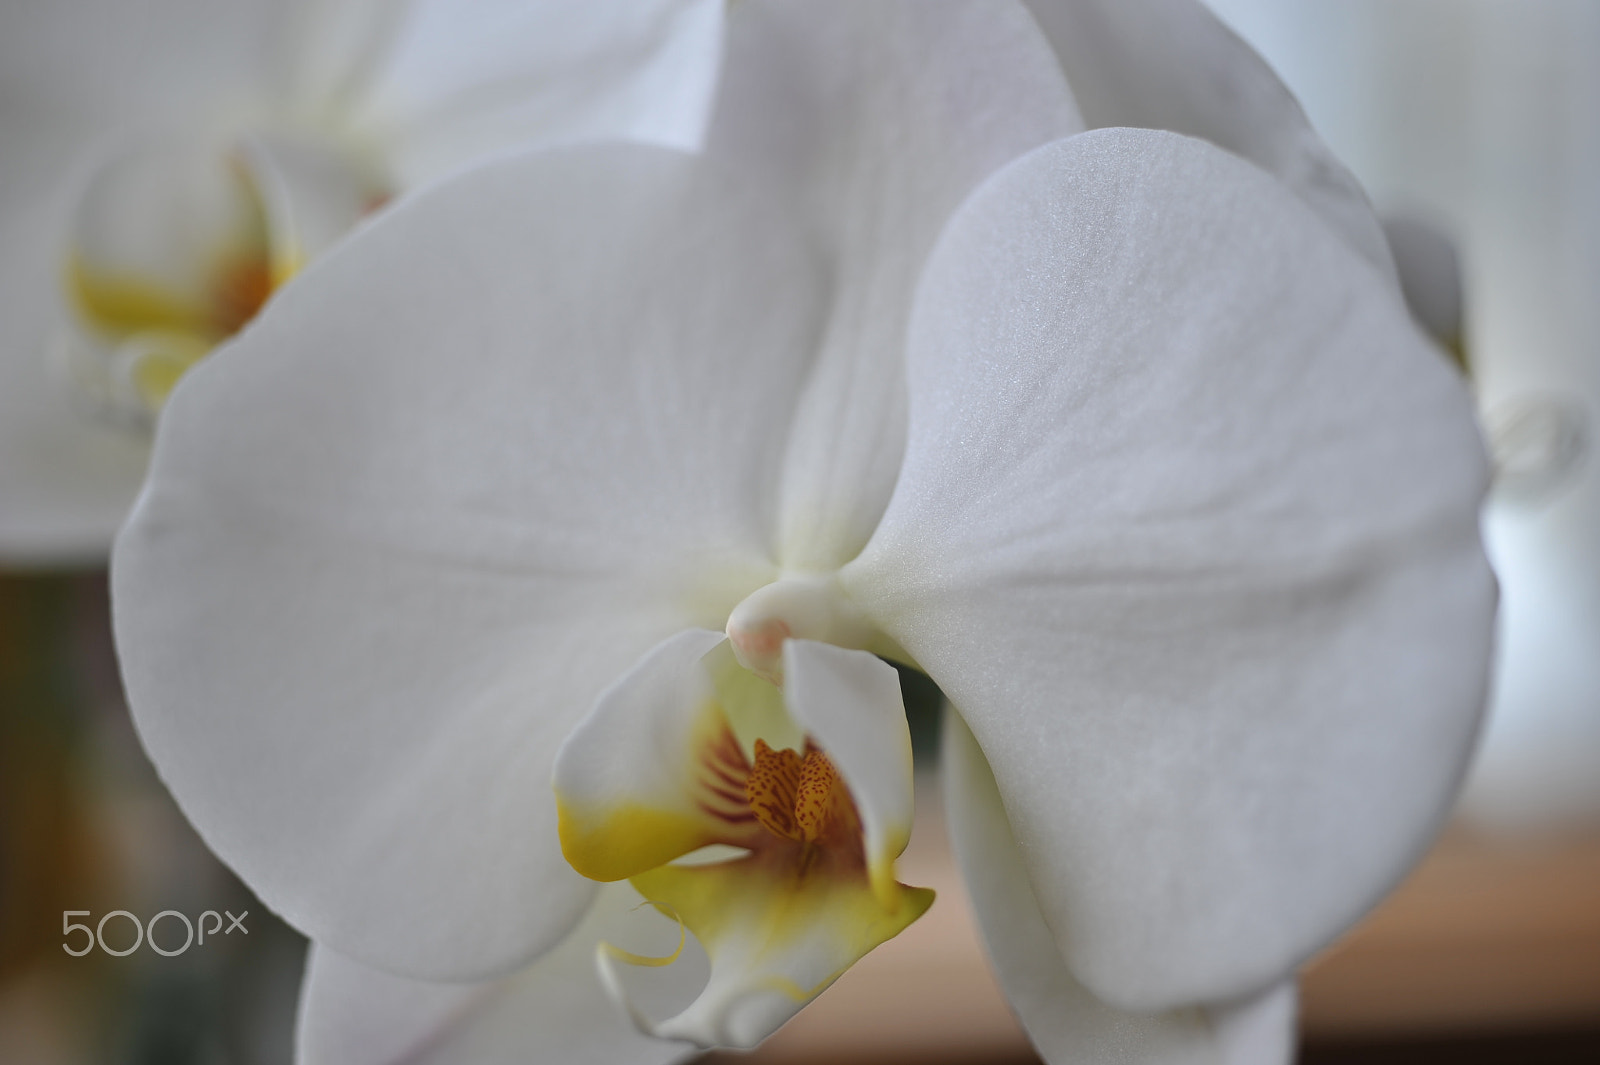 AF Micro-Nikkor 55mm f/2.8 sample photo. Orchids photography